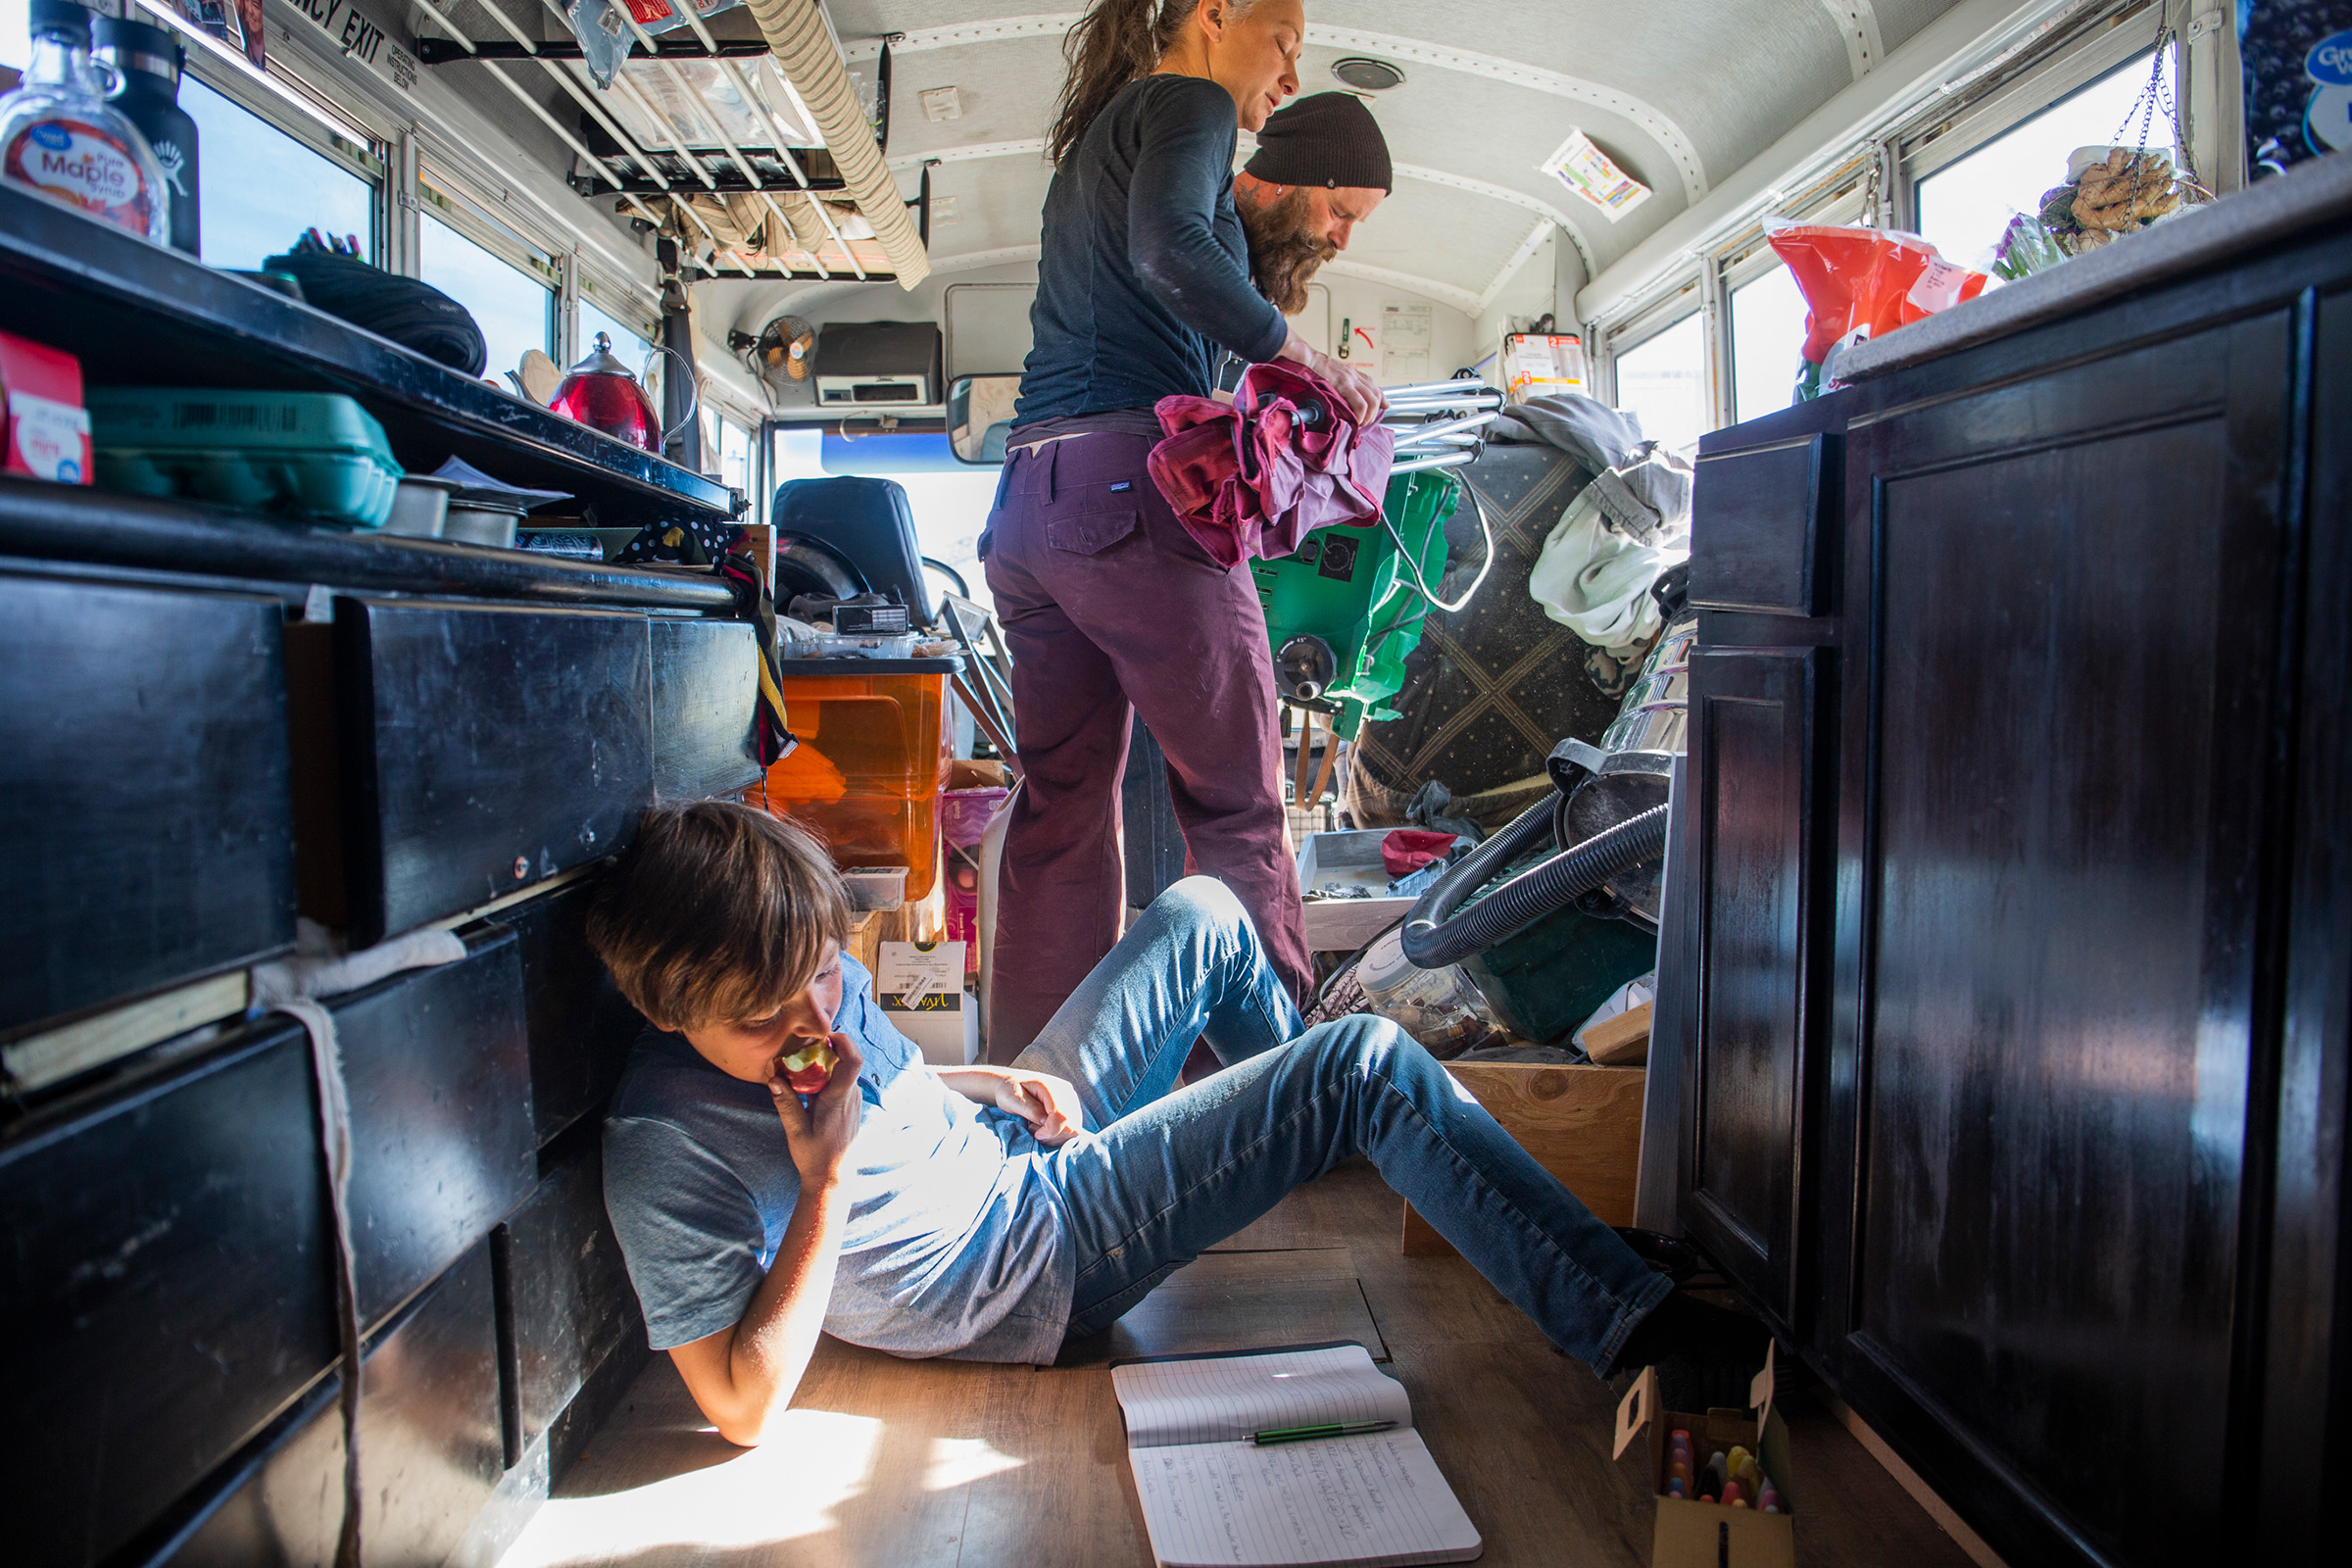 Max works on chemistry schoolwork on the floor of the bus, while Paula lends her table saw to a neighbor to work on his own bus on Feb. 23. (Nina Riggio for TIME)